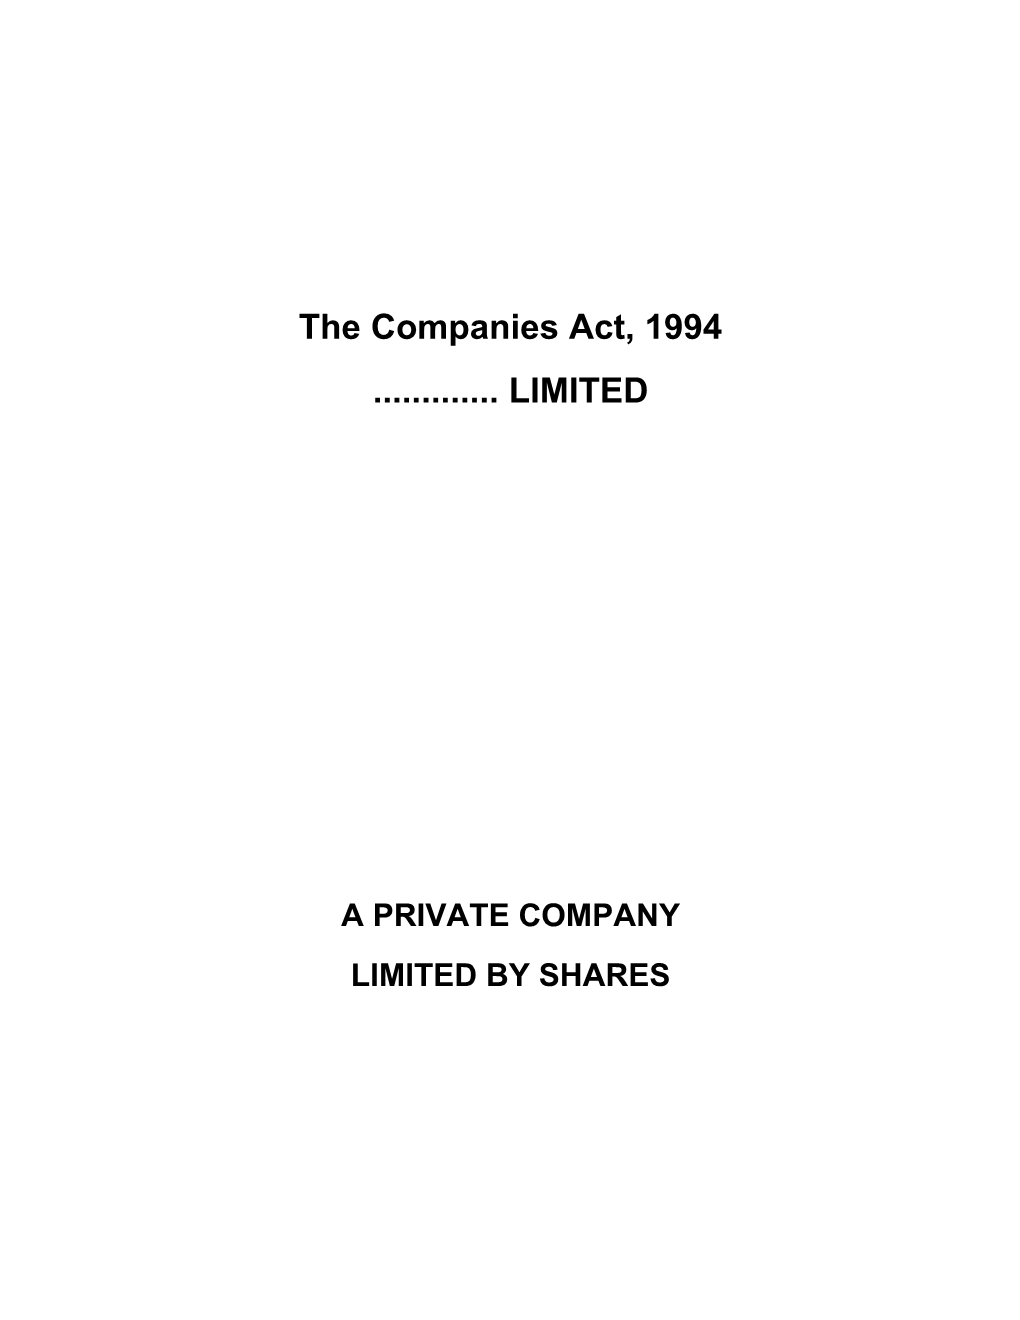 The Companies Act, 1994